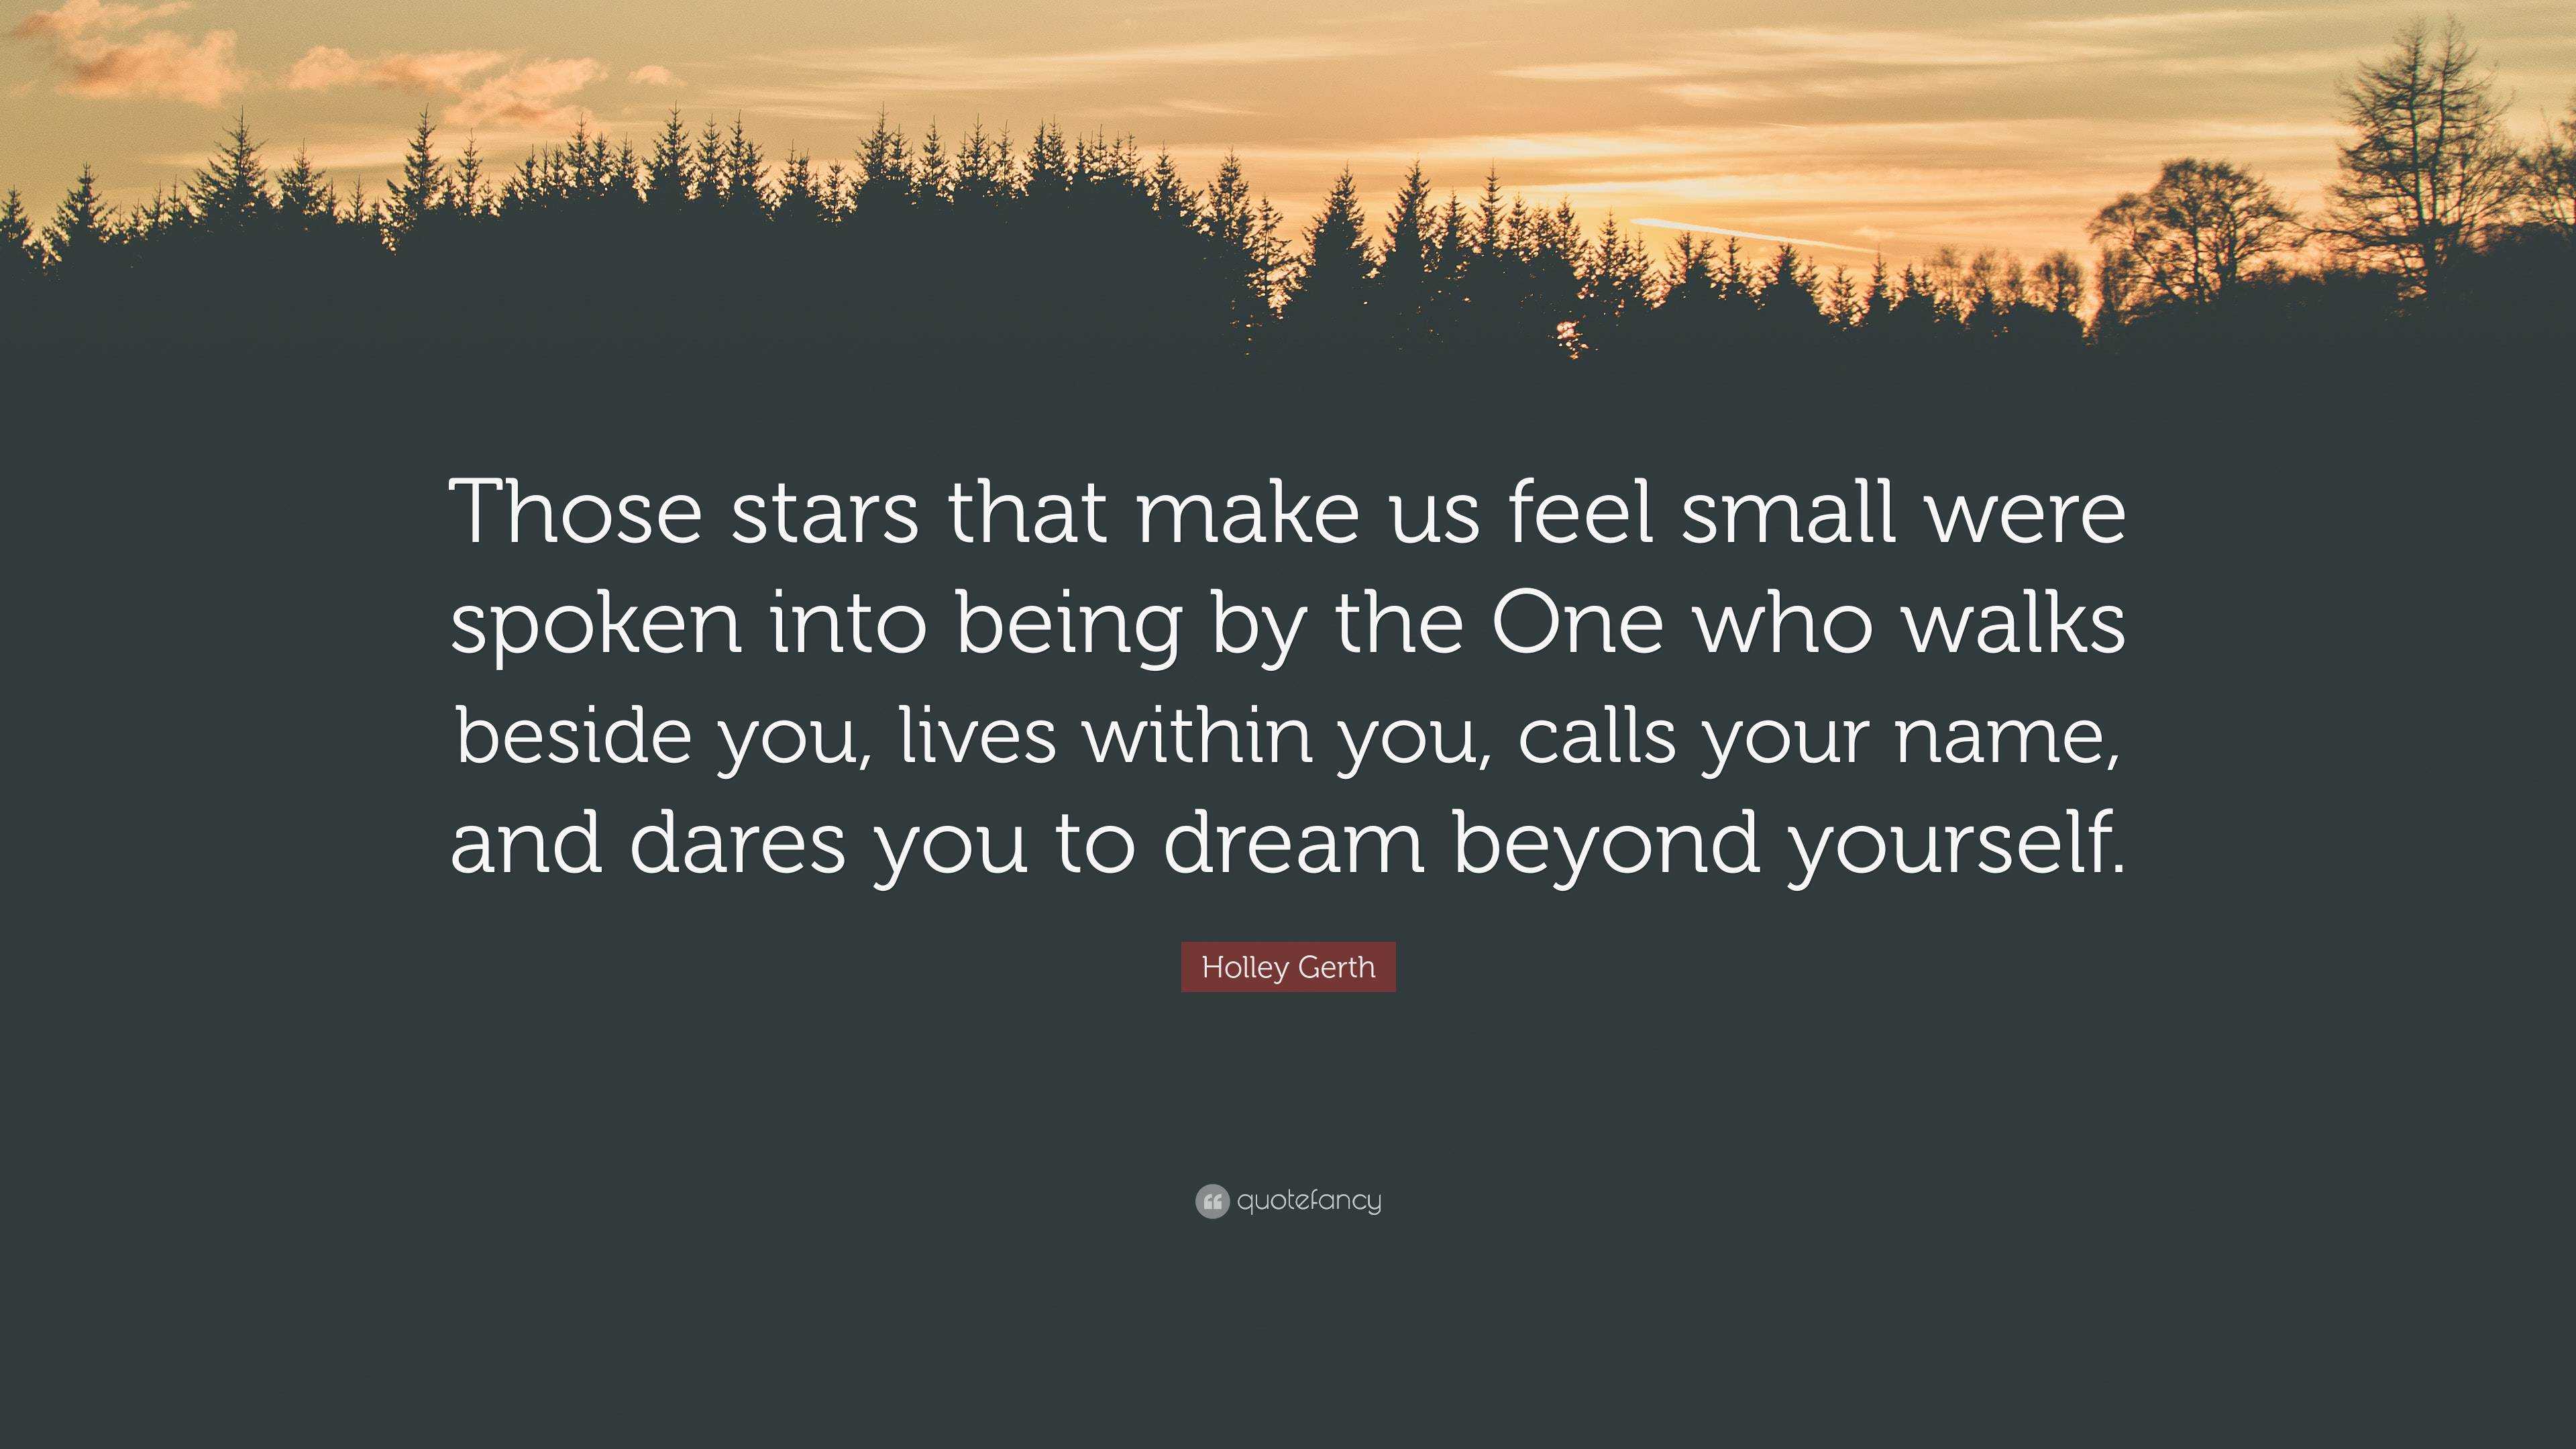 https://quotefancy.com/media/wallpaper/3840x2160/6709696-Holley-Gerth-Quote-Those-stars-that-make-us-feel-small-were-spoken.jpg